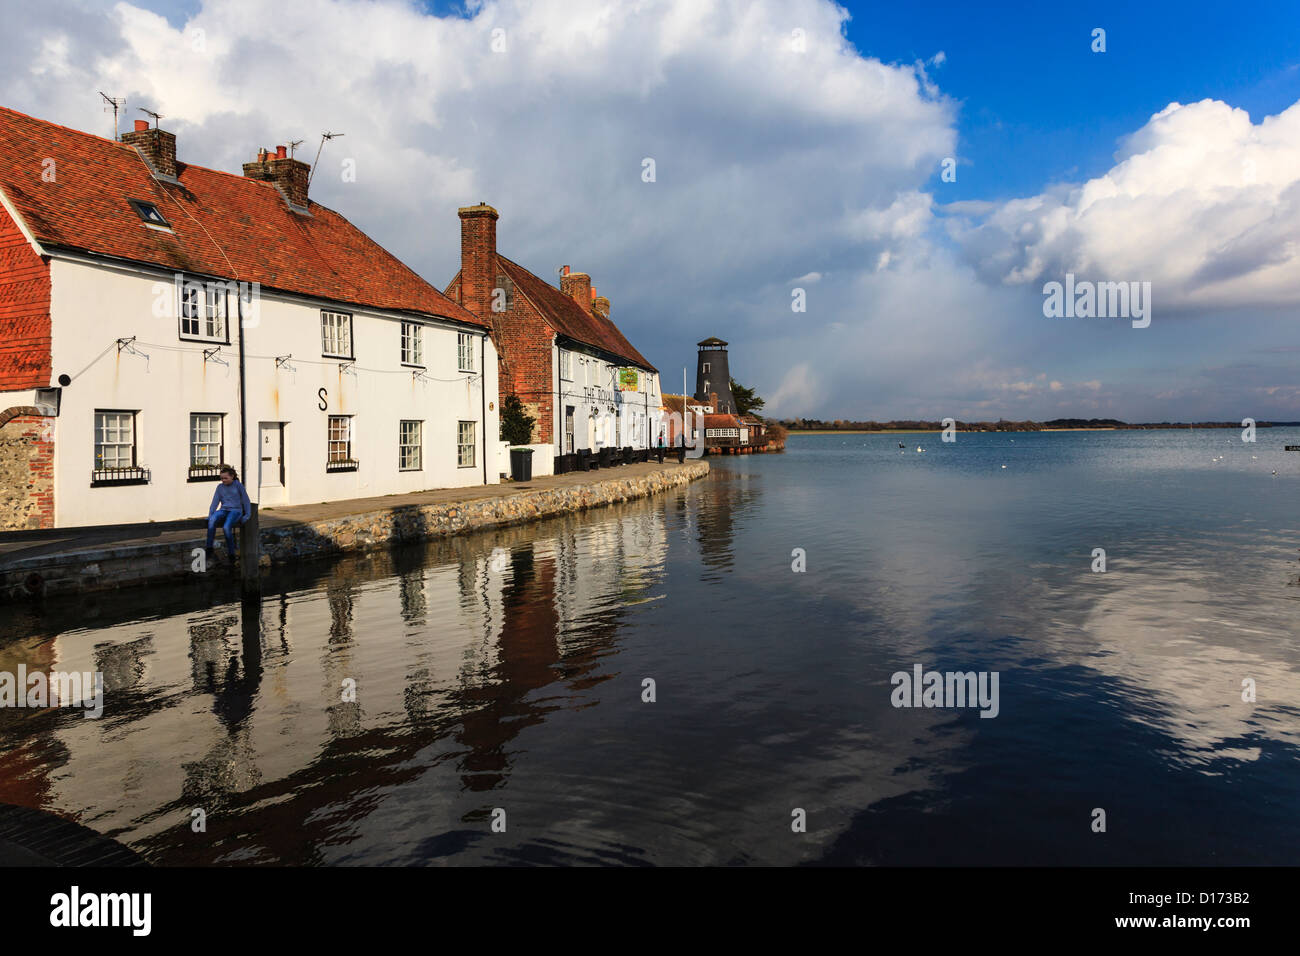 A young girl sits on a gate and swings at High Tide, Langstone, with the Royal Oak Pub and reflections in the water, Hampshire Stock Photo